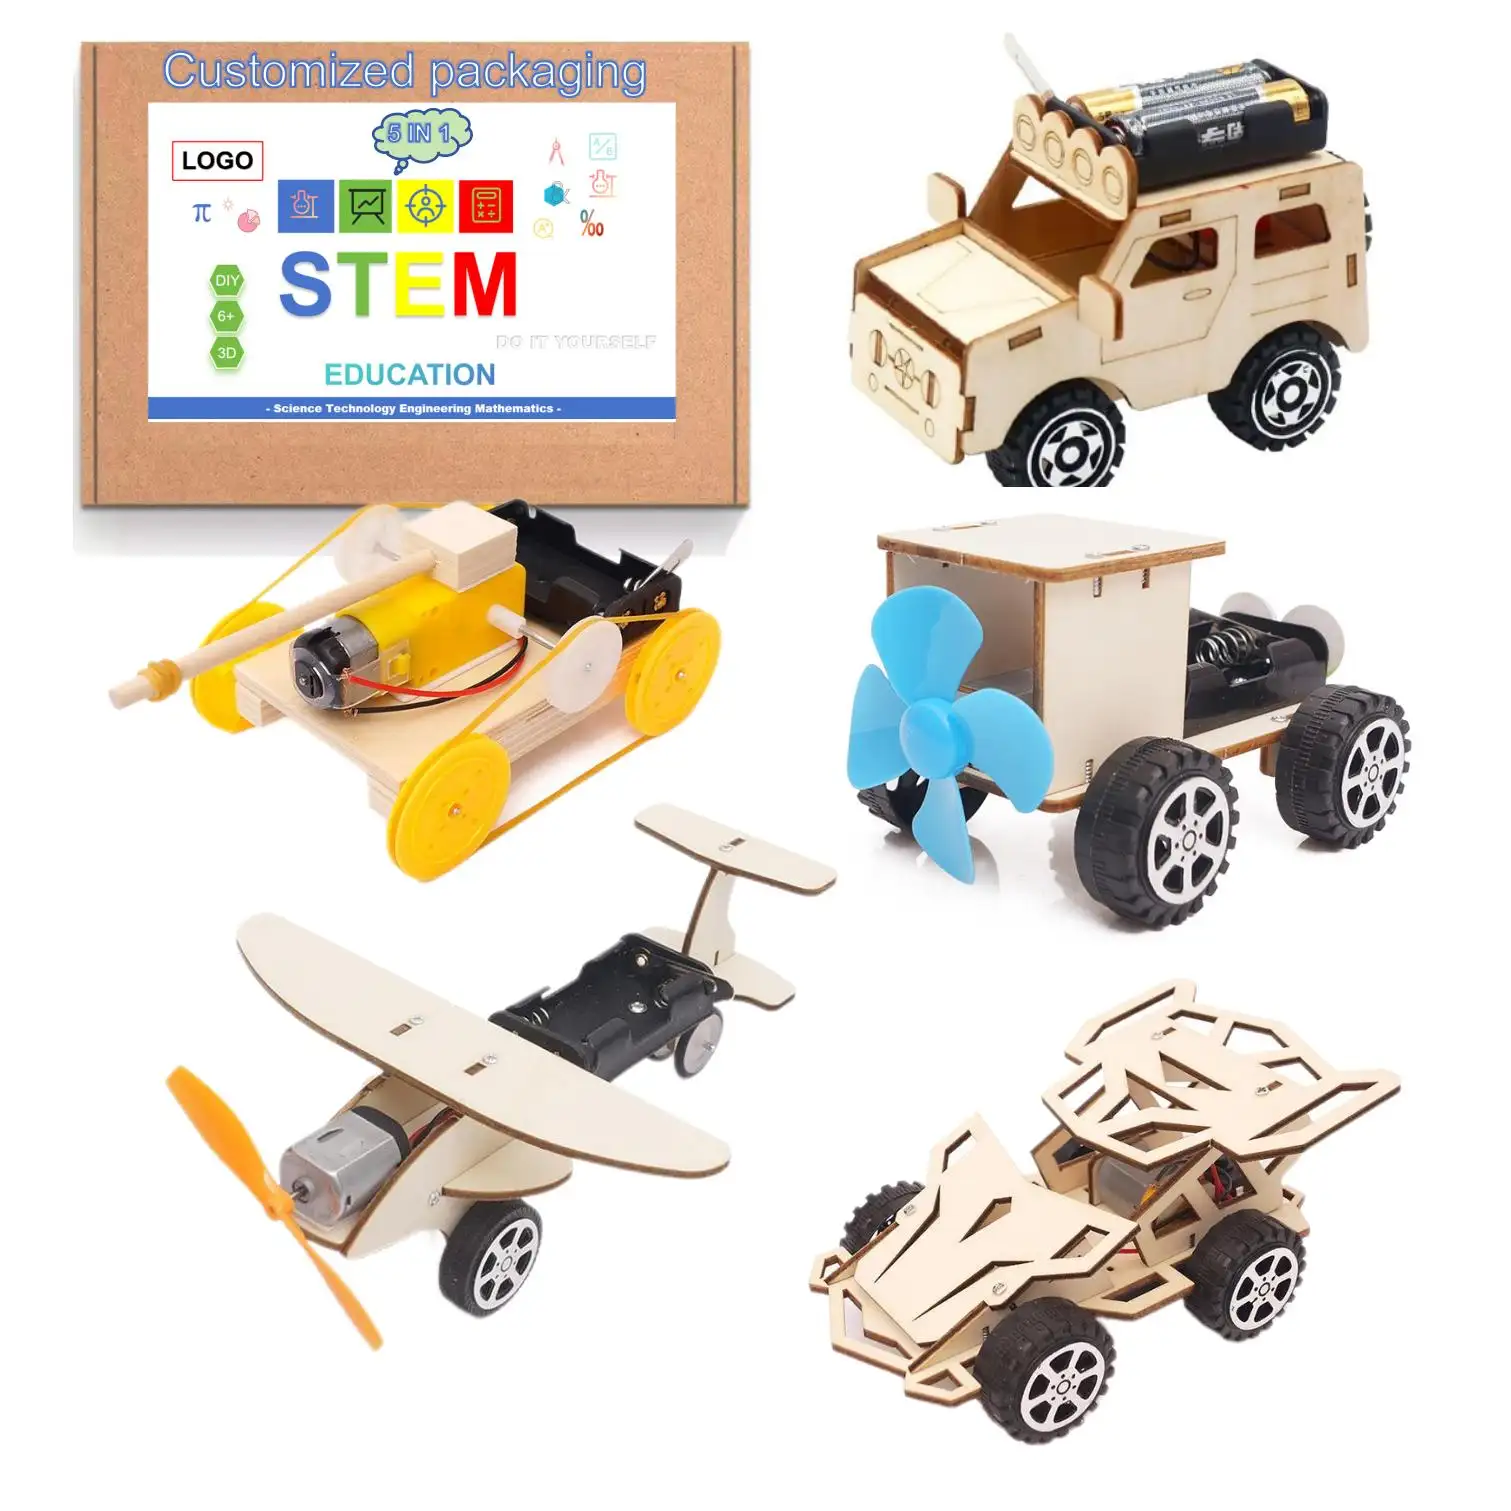 MI Wooden 3D Jigsaw Puzzle 5 In 1 STEM Toys Kit Educational Car Aircraft Wooden STEM DIY Kits For Kids Electronic Toys For Boys